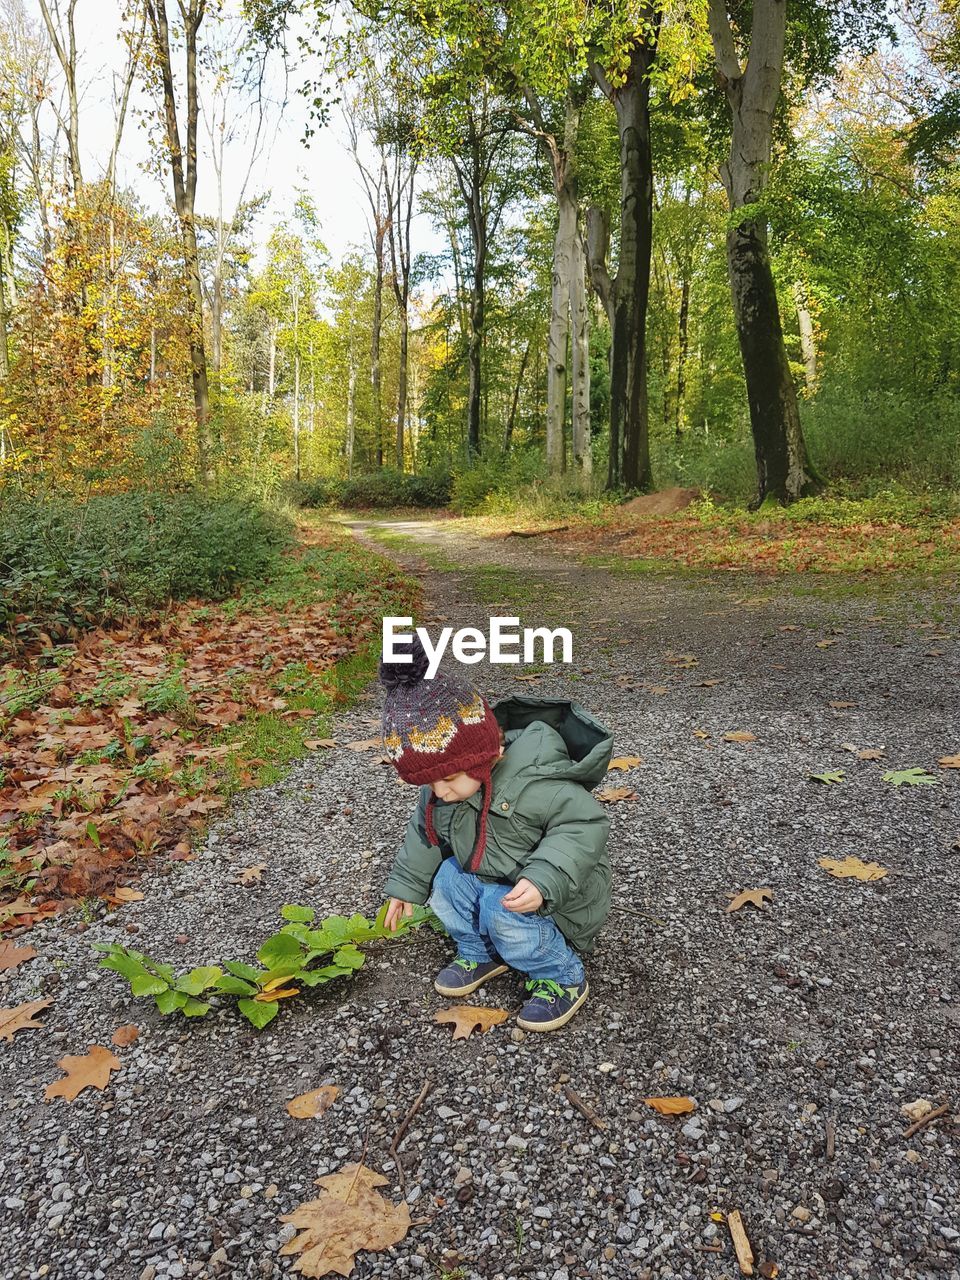 Boy crouching on road during autumn